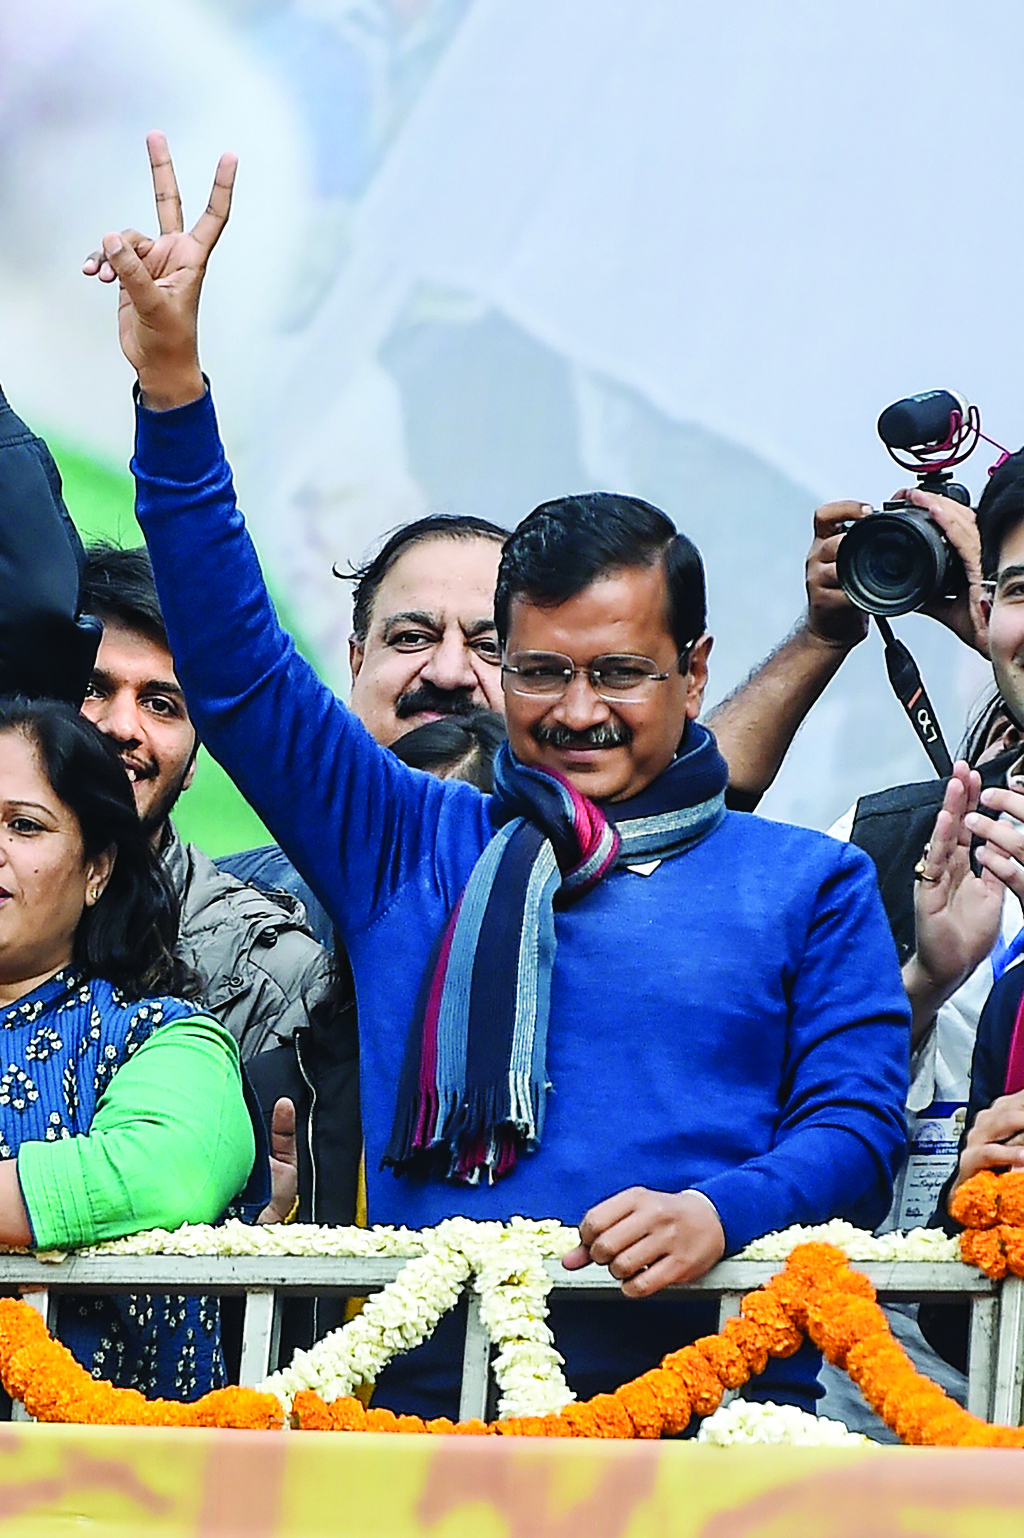 Aam Aadmi Party (AAP) chief Arvind Kejriwal gestures towards his supporters at the party headquarters in New Delhi on February 11, 2020. (Photo by Money SHARMA / AFP)